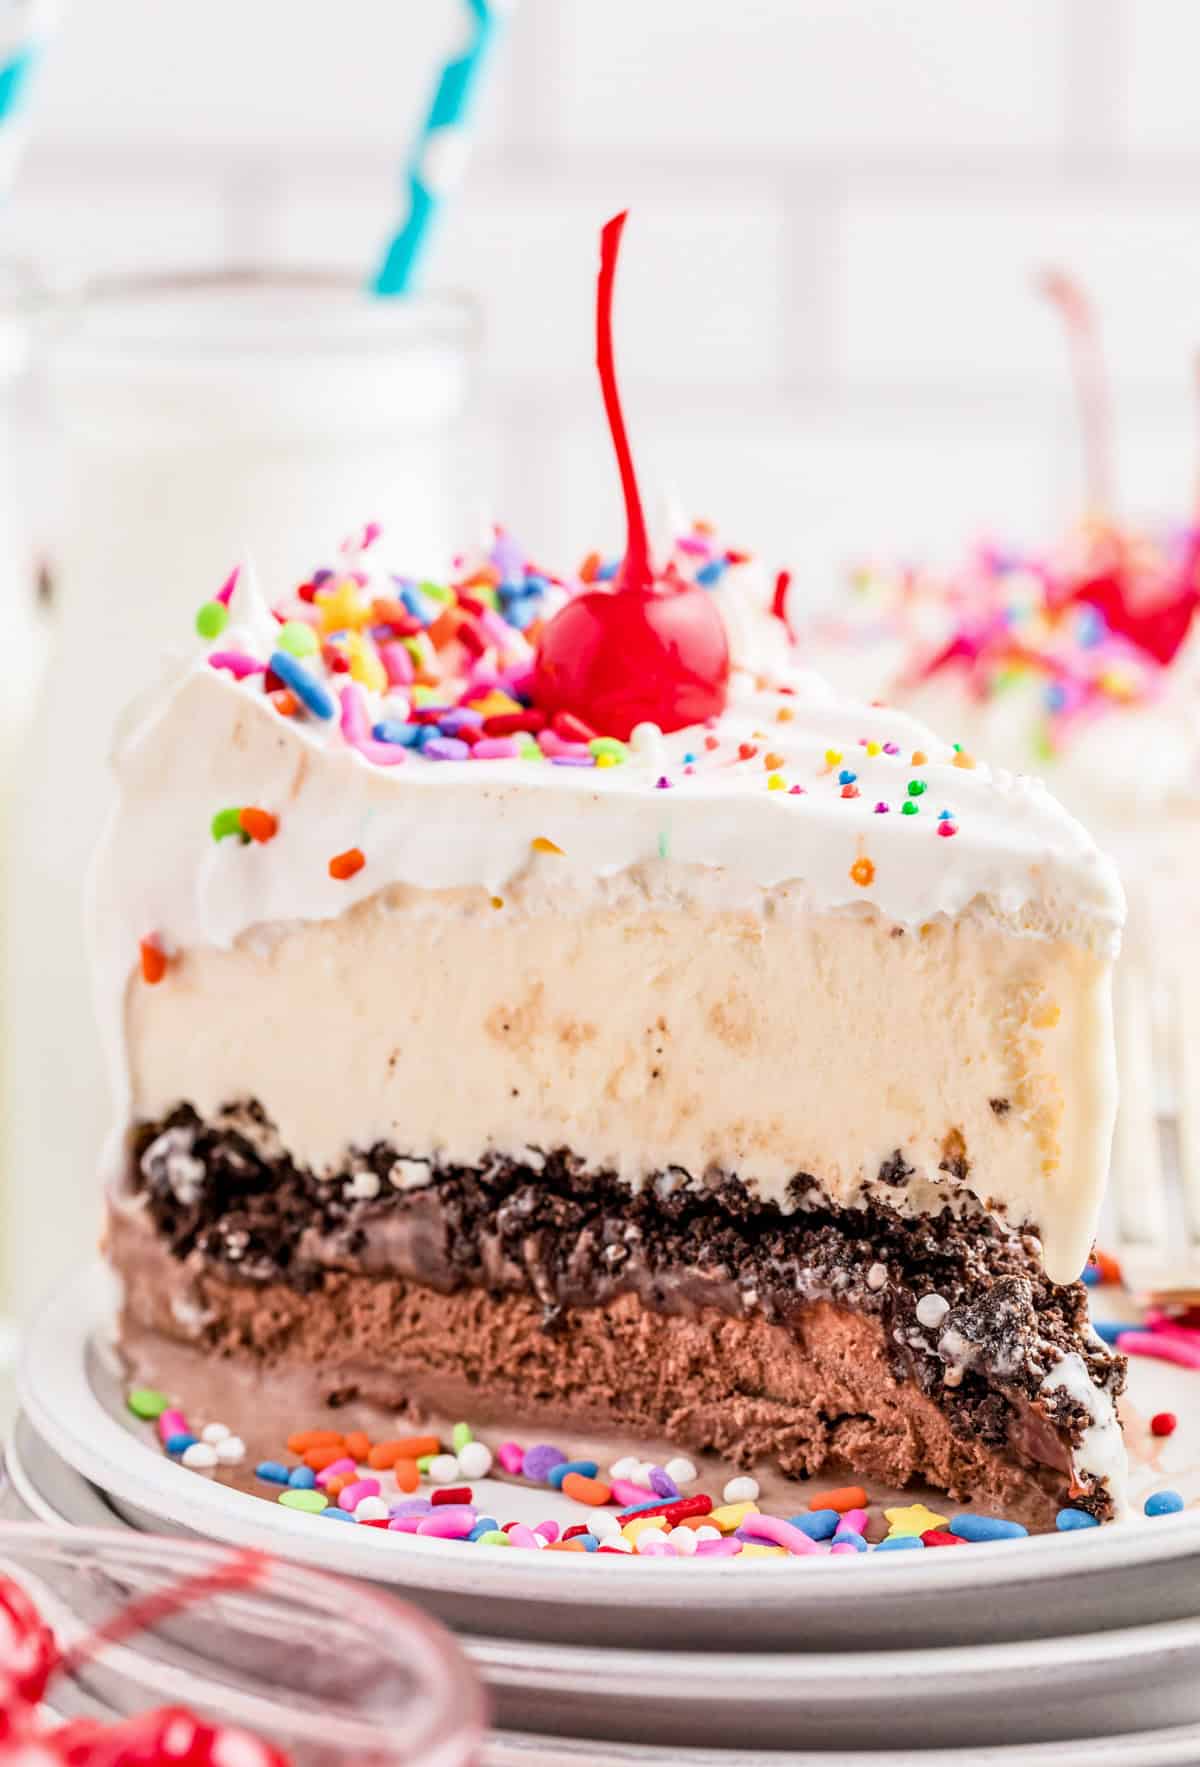 One slice of the Copycat Dairy Queen Ice Cream Cake on a white cake showing the layers and toppings.